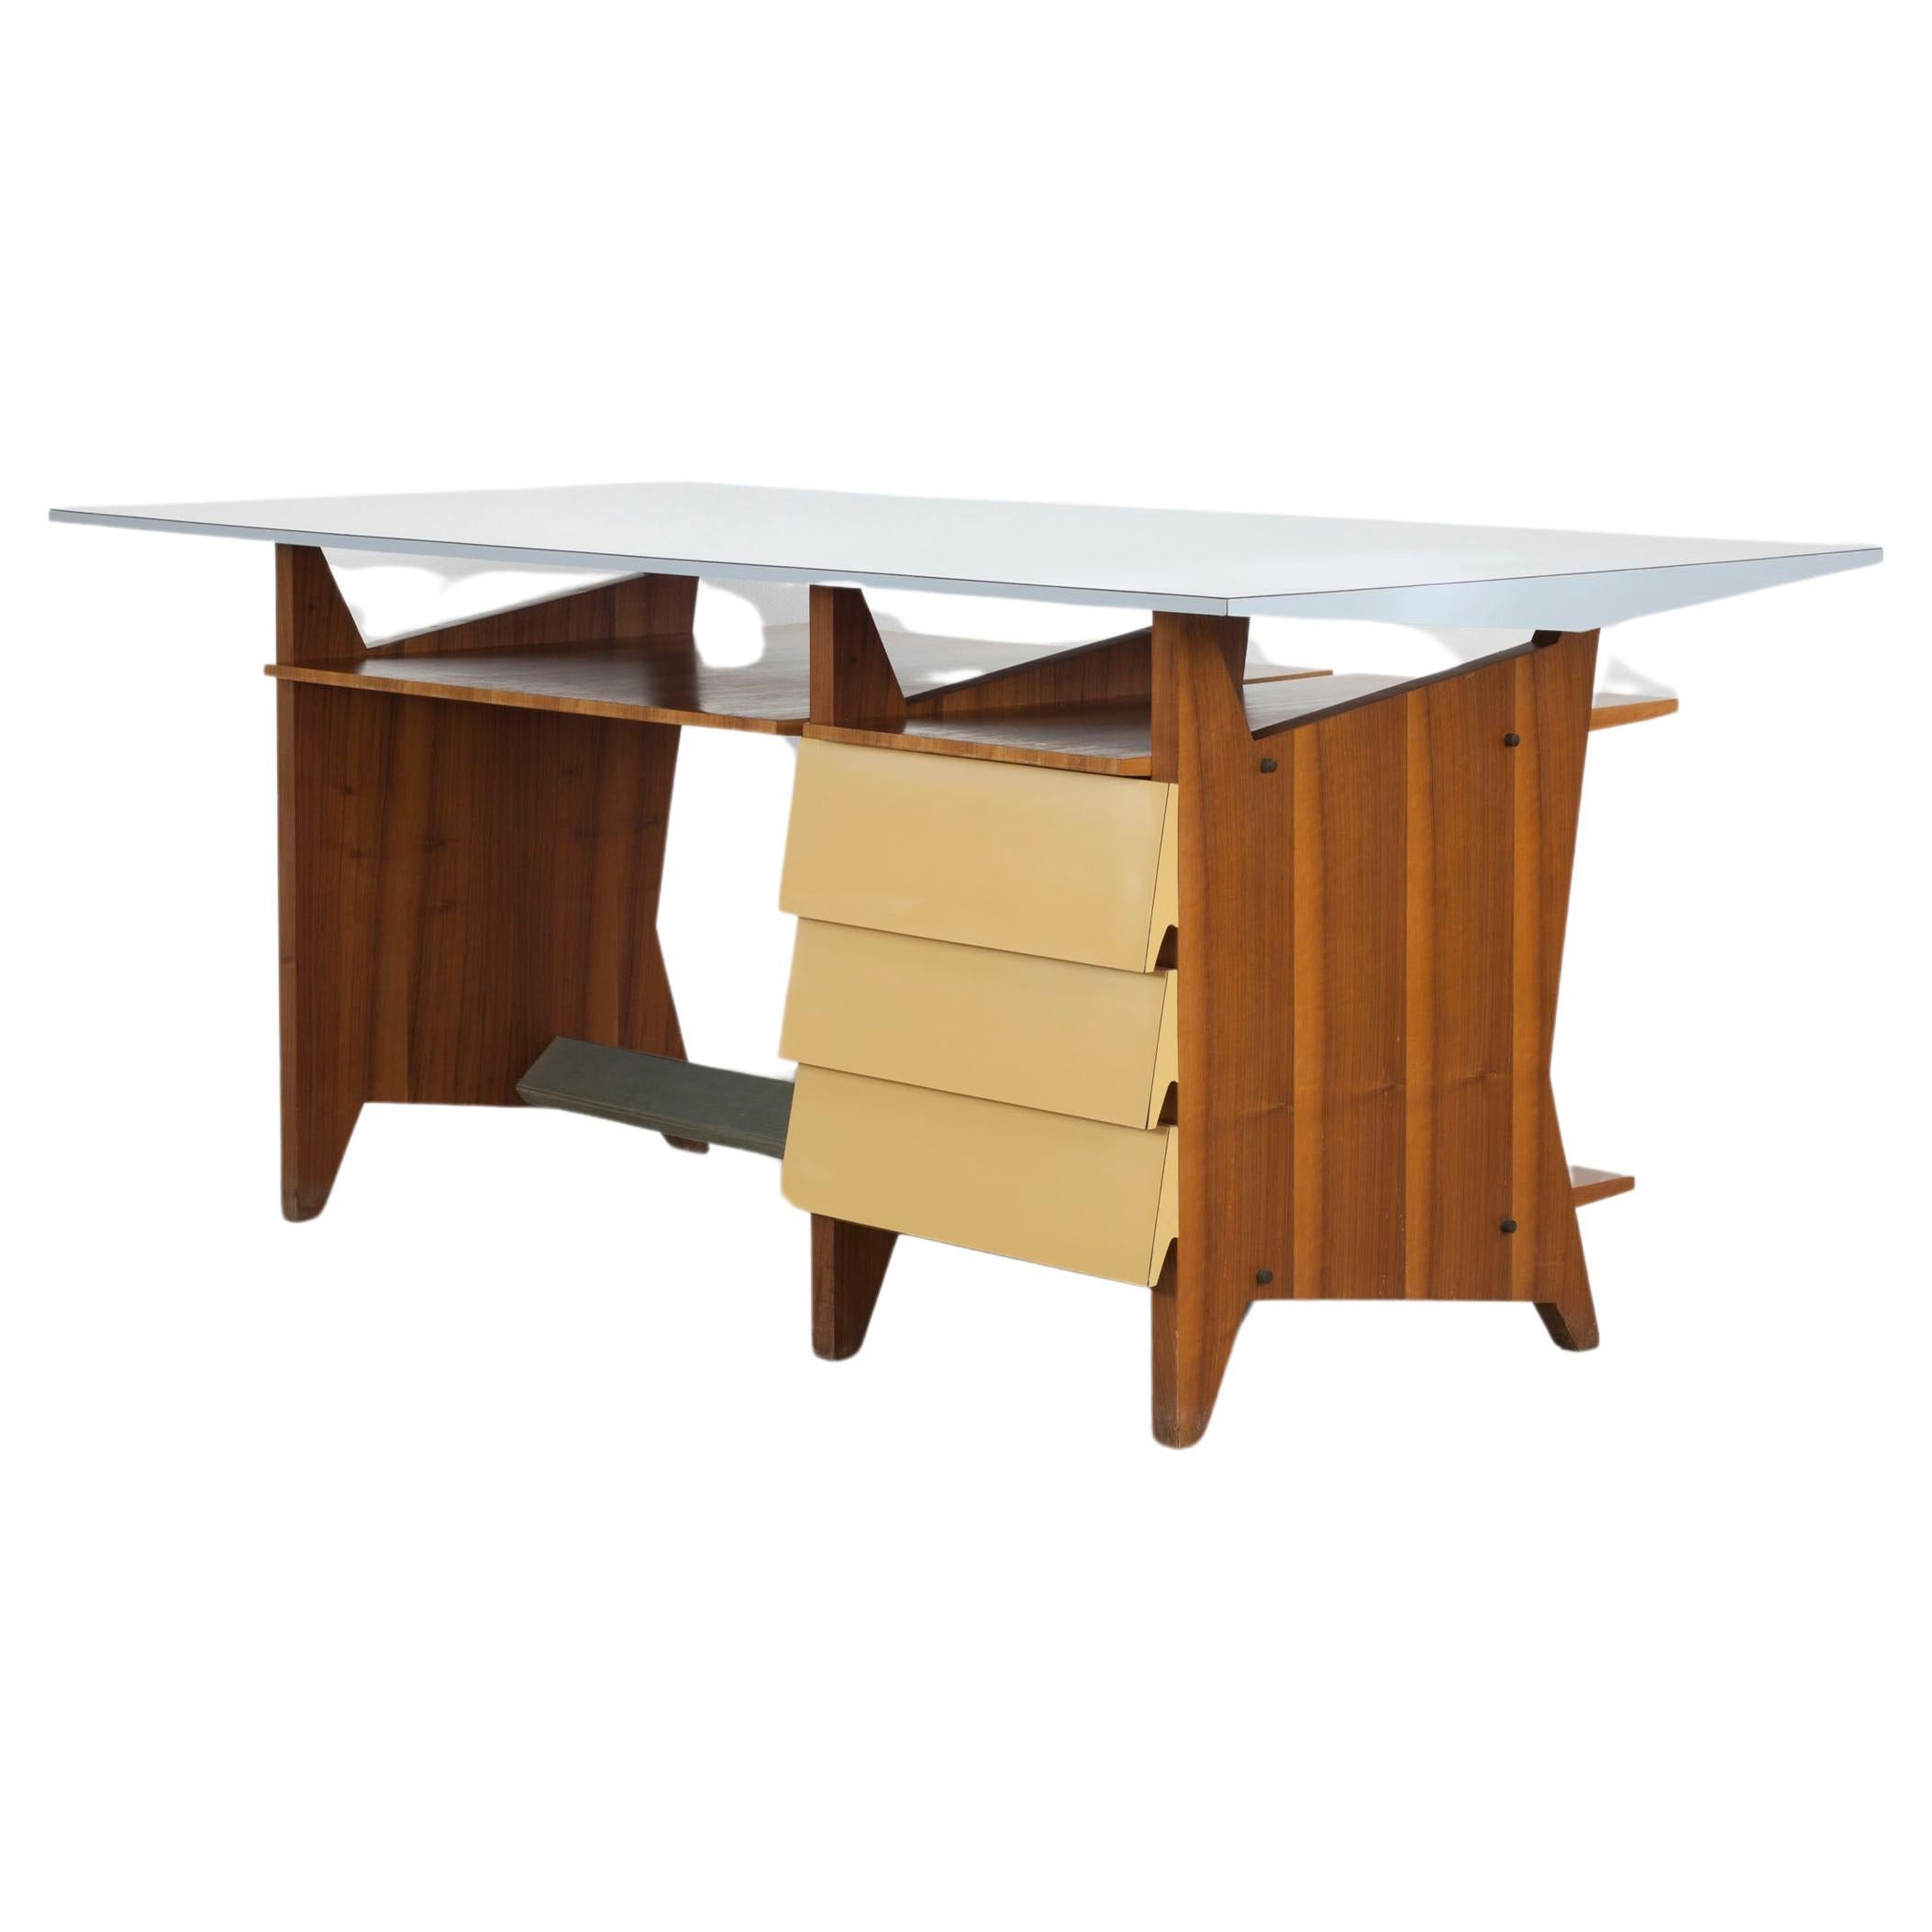 Modernist Italien writing desk with drawers and light blue Formica table top. 